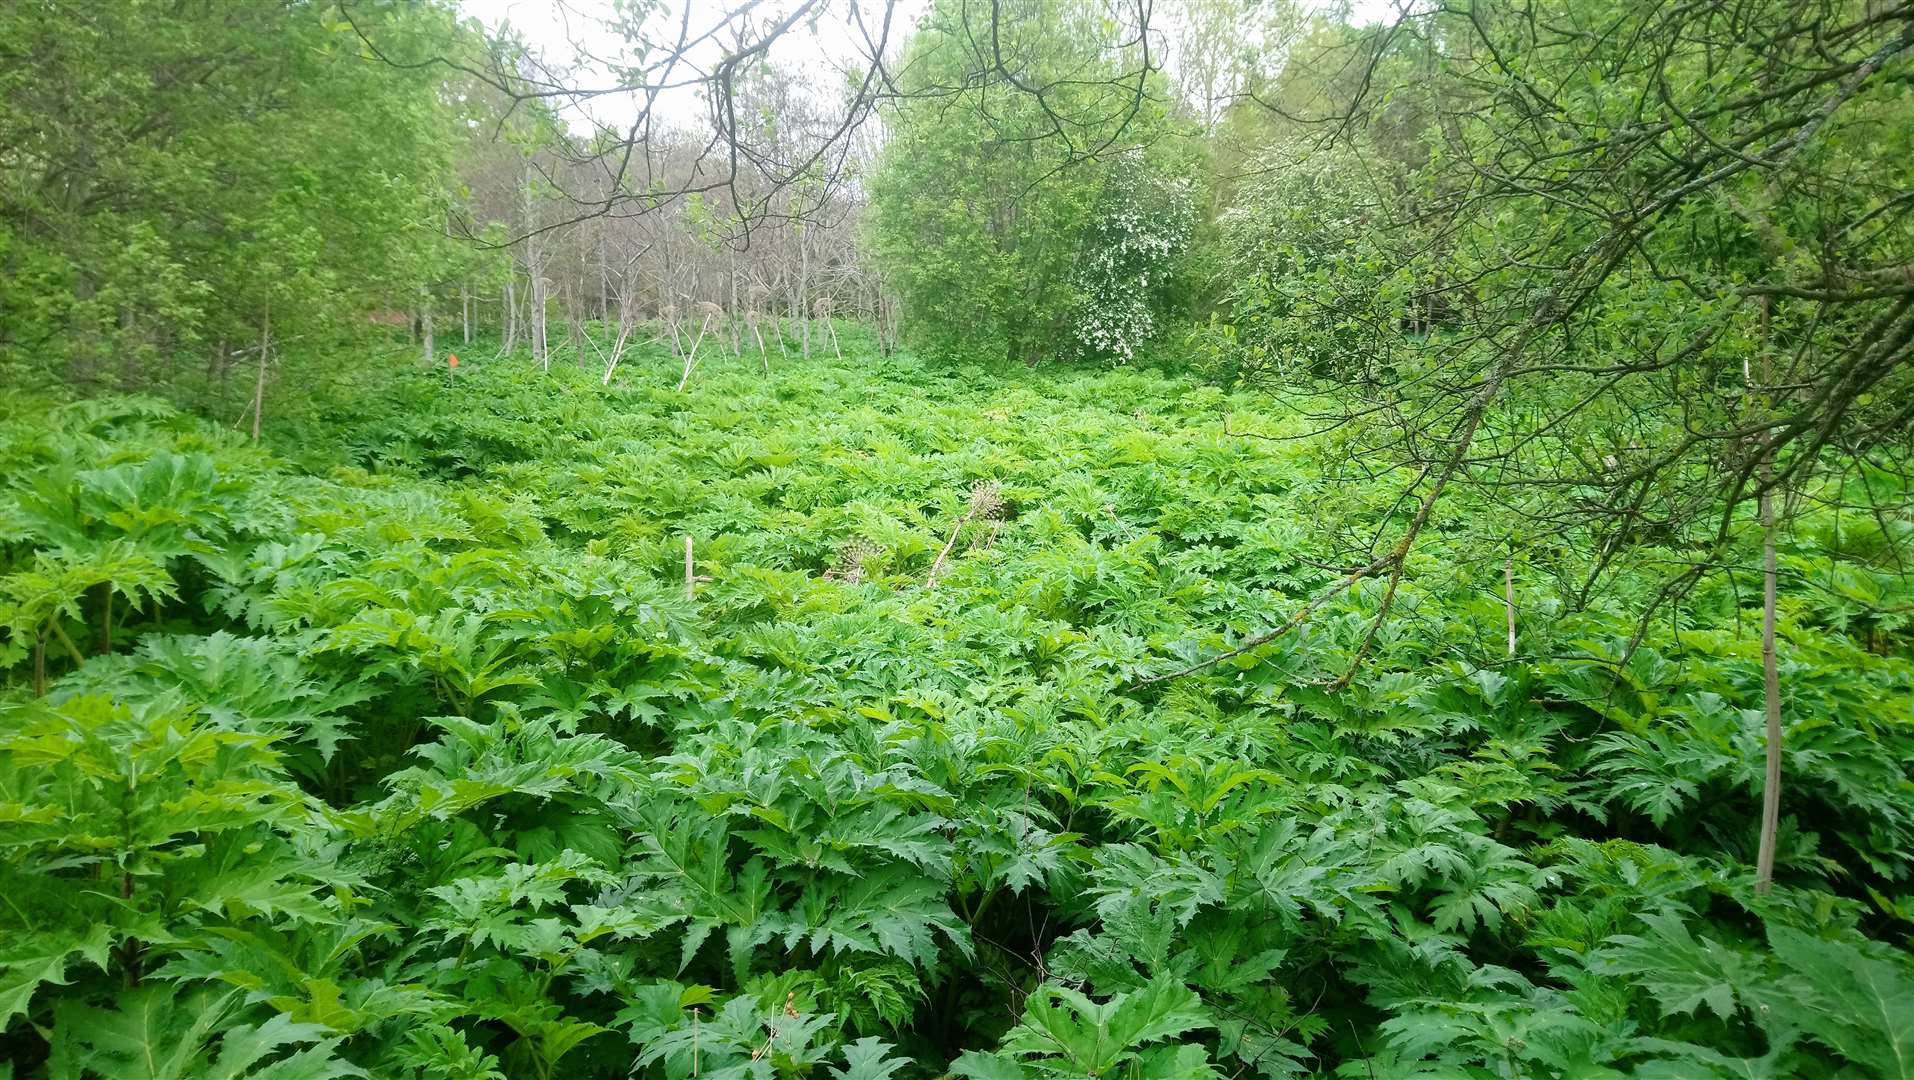 Land near Waterford Recycling Centre was choked with Giant Hogweed.